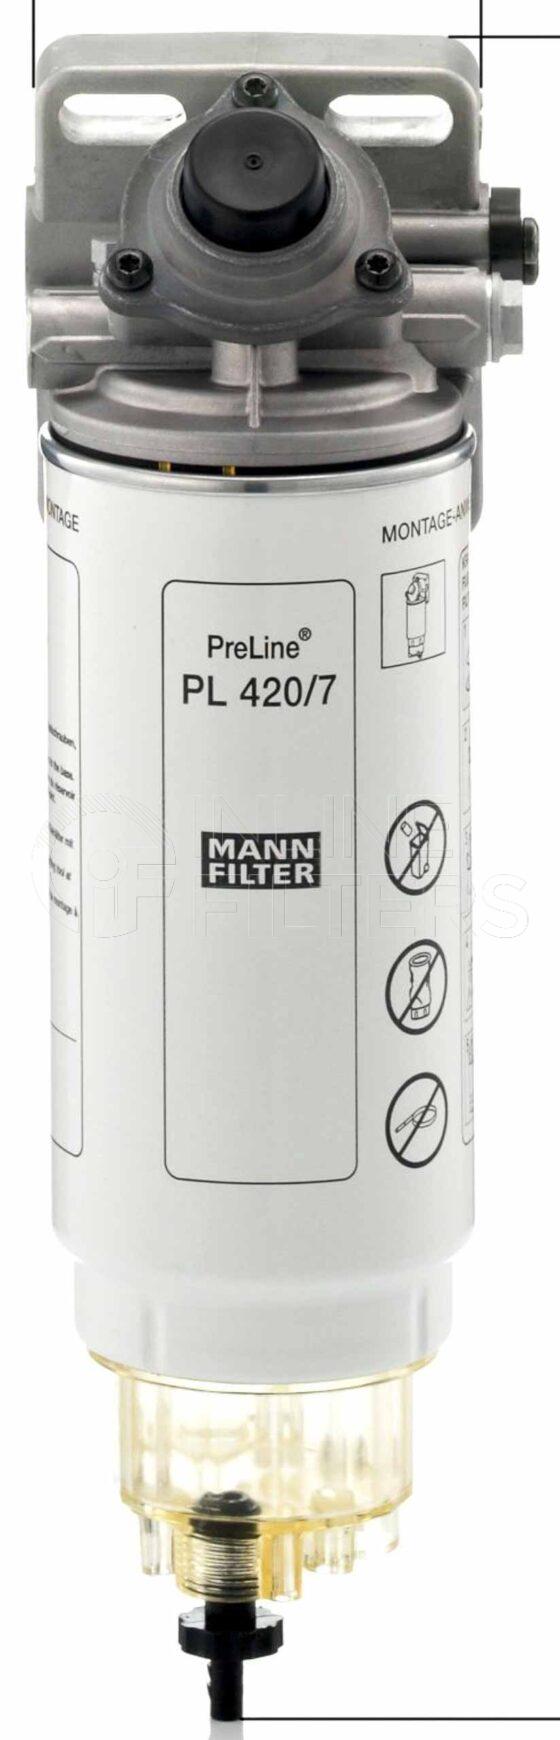 Mann 6660662255. FILTER-Fuel(Brand Specific) Product – Brand Specific Mann – Pre Line Product Service part for PreLine Series PreLine 420